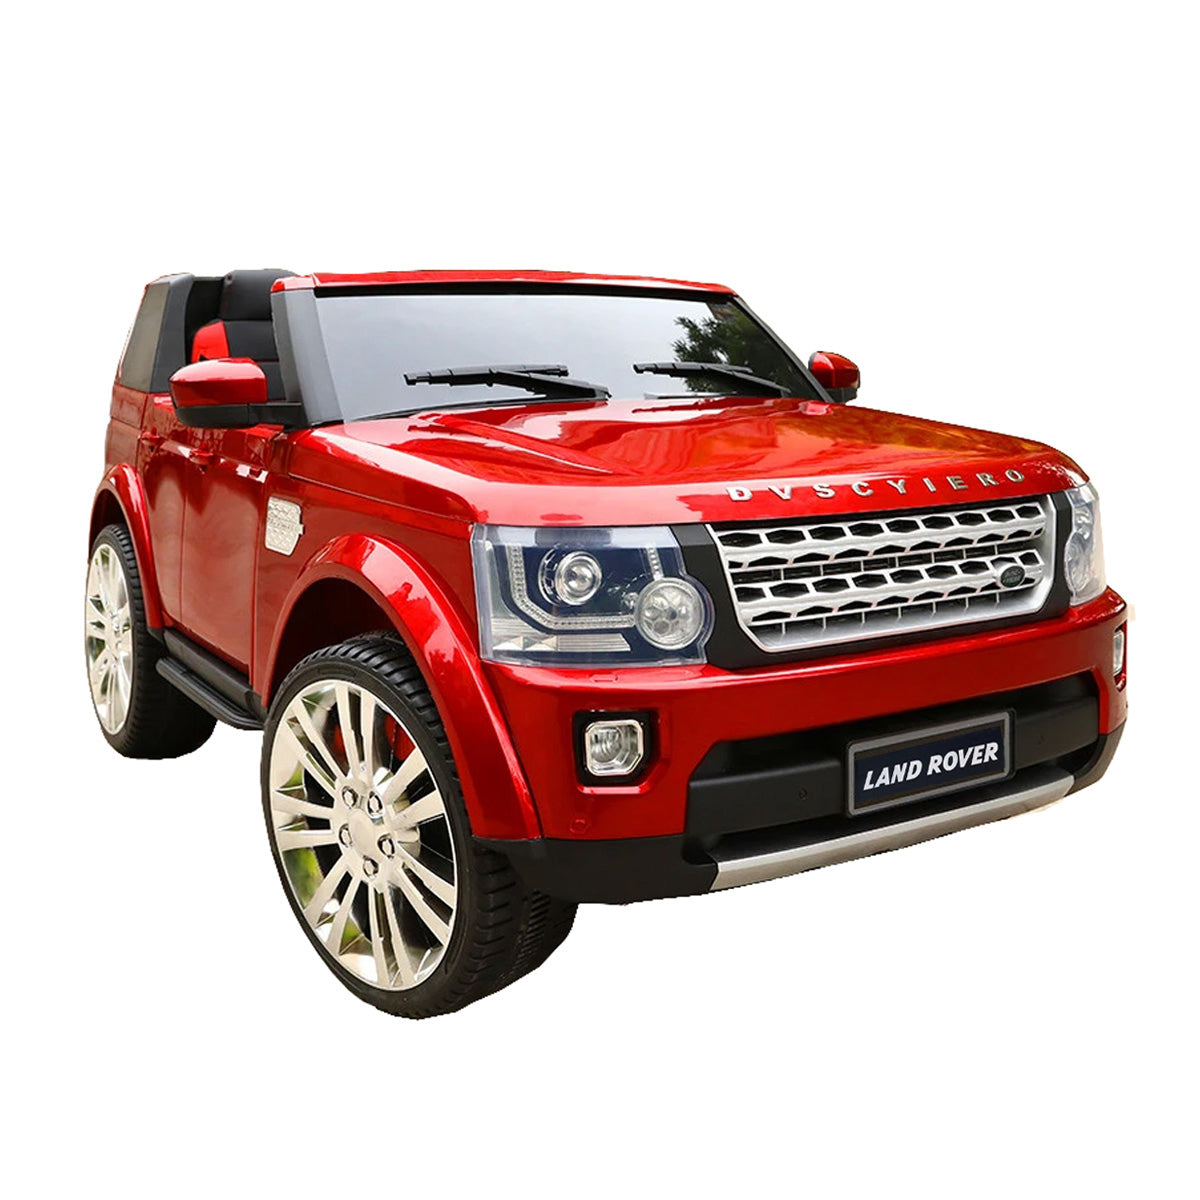 Fliptoy™ 12V 3.7 MPH 2-Seater jeep | discovery Ride On Car | Toy Parent Remote Control, MP3 Player